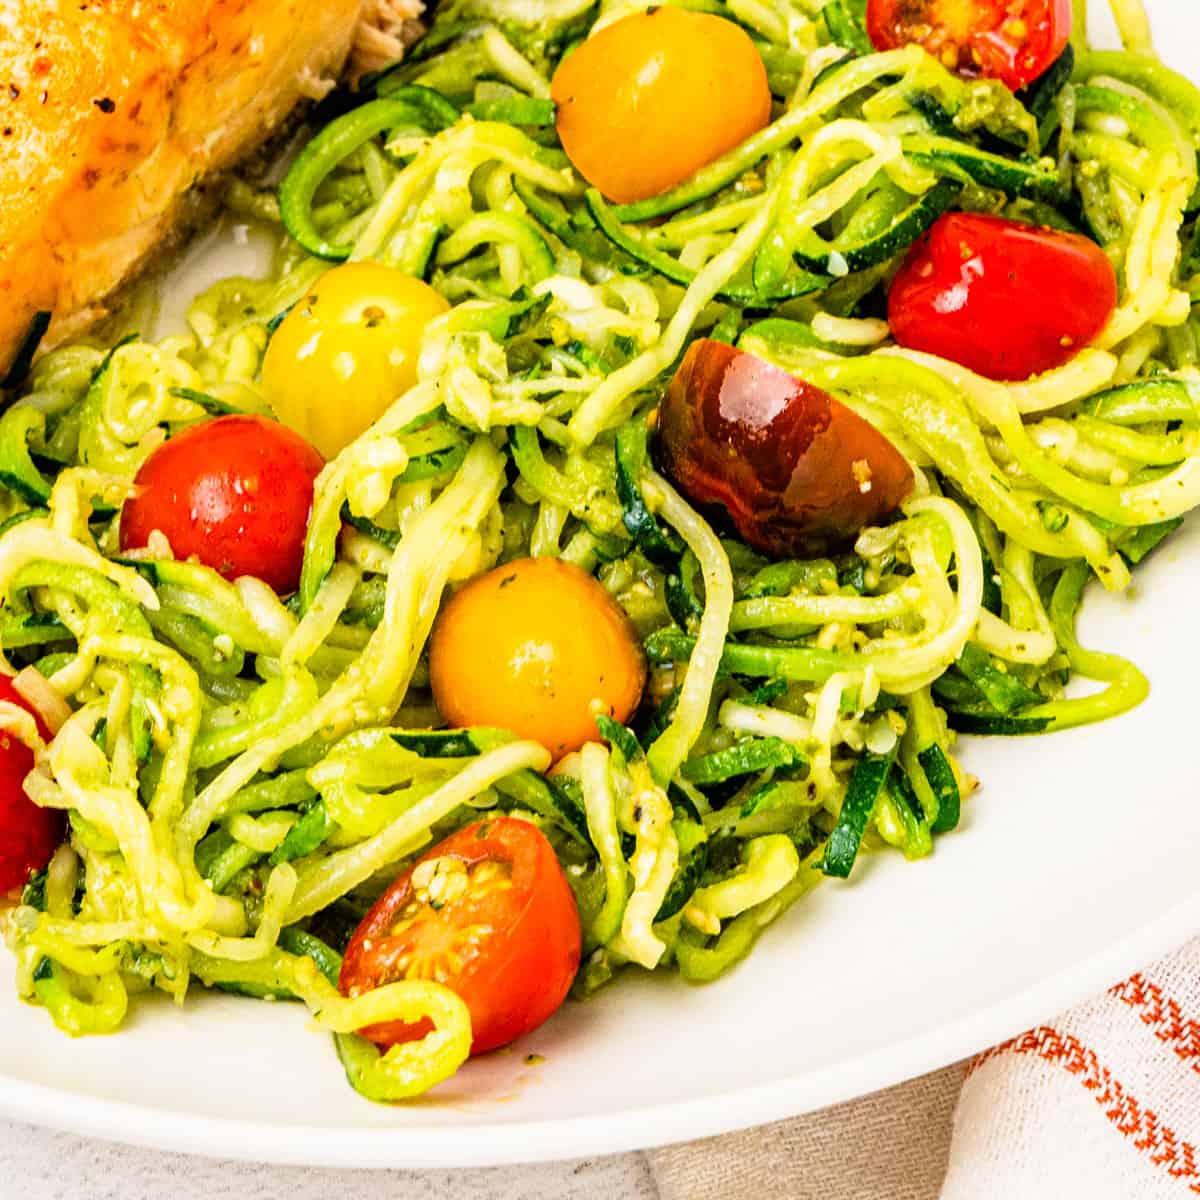 Zucchini noodles with pesto sauce and sliced cherry tomatoes.